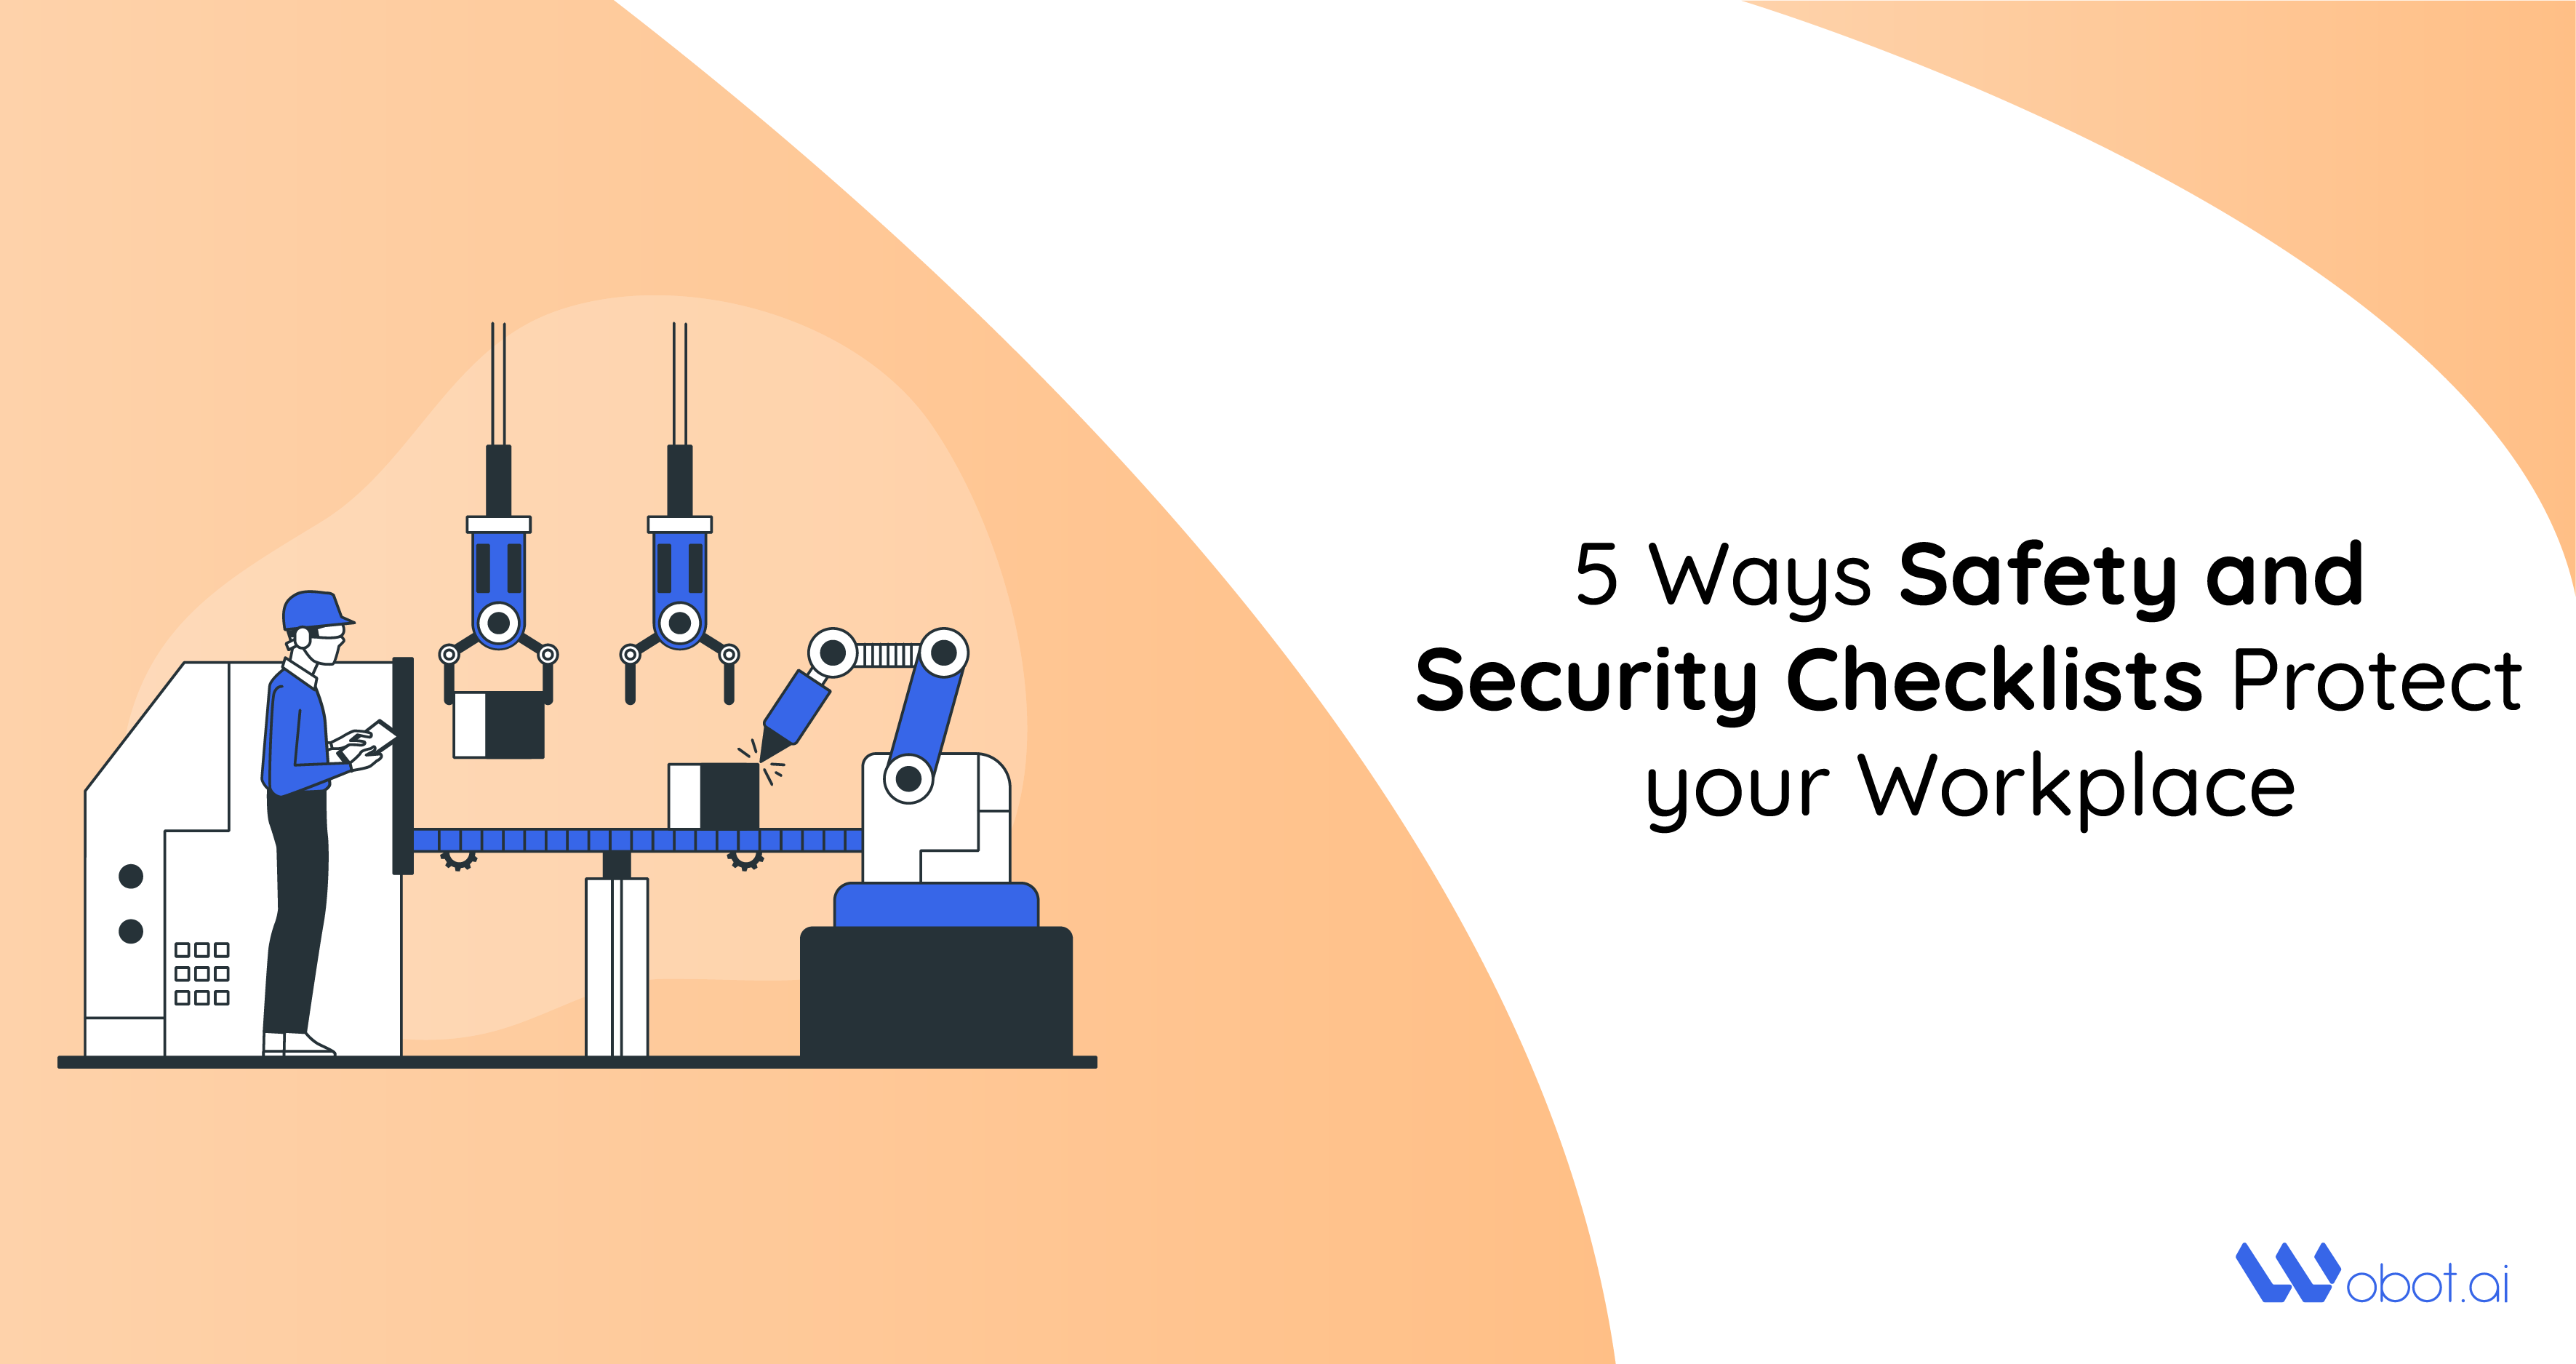 5 Ways Safety and Security Checklists Protect your Workplace